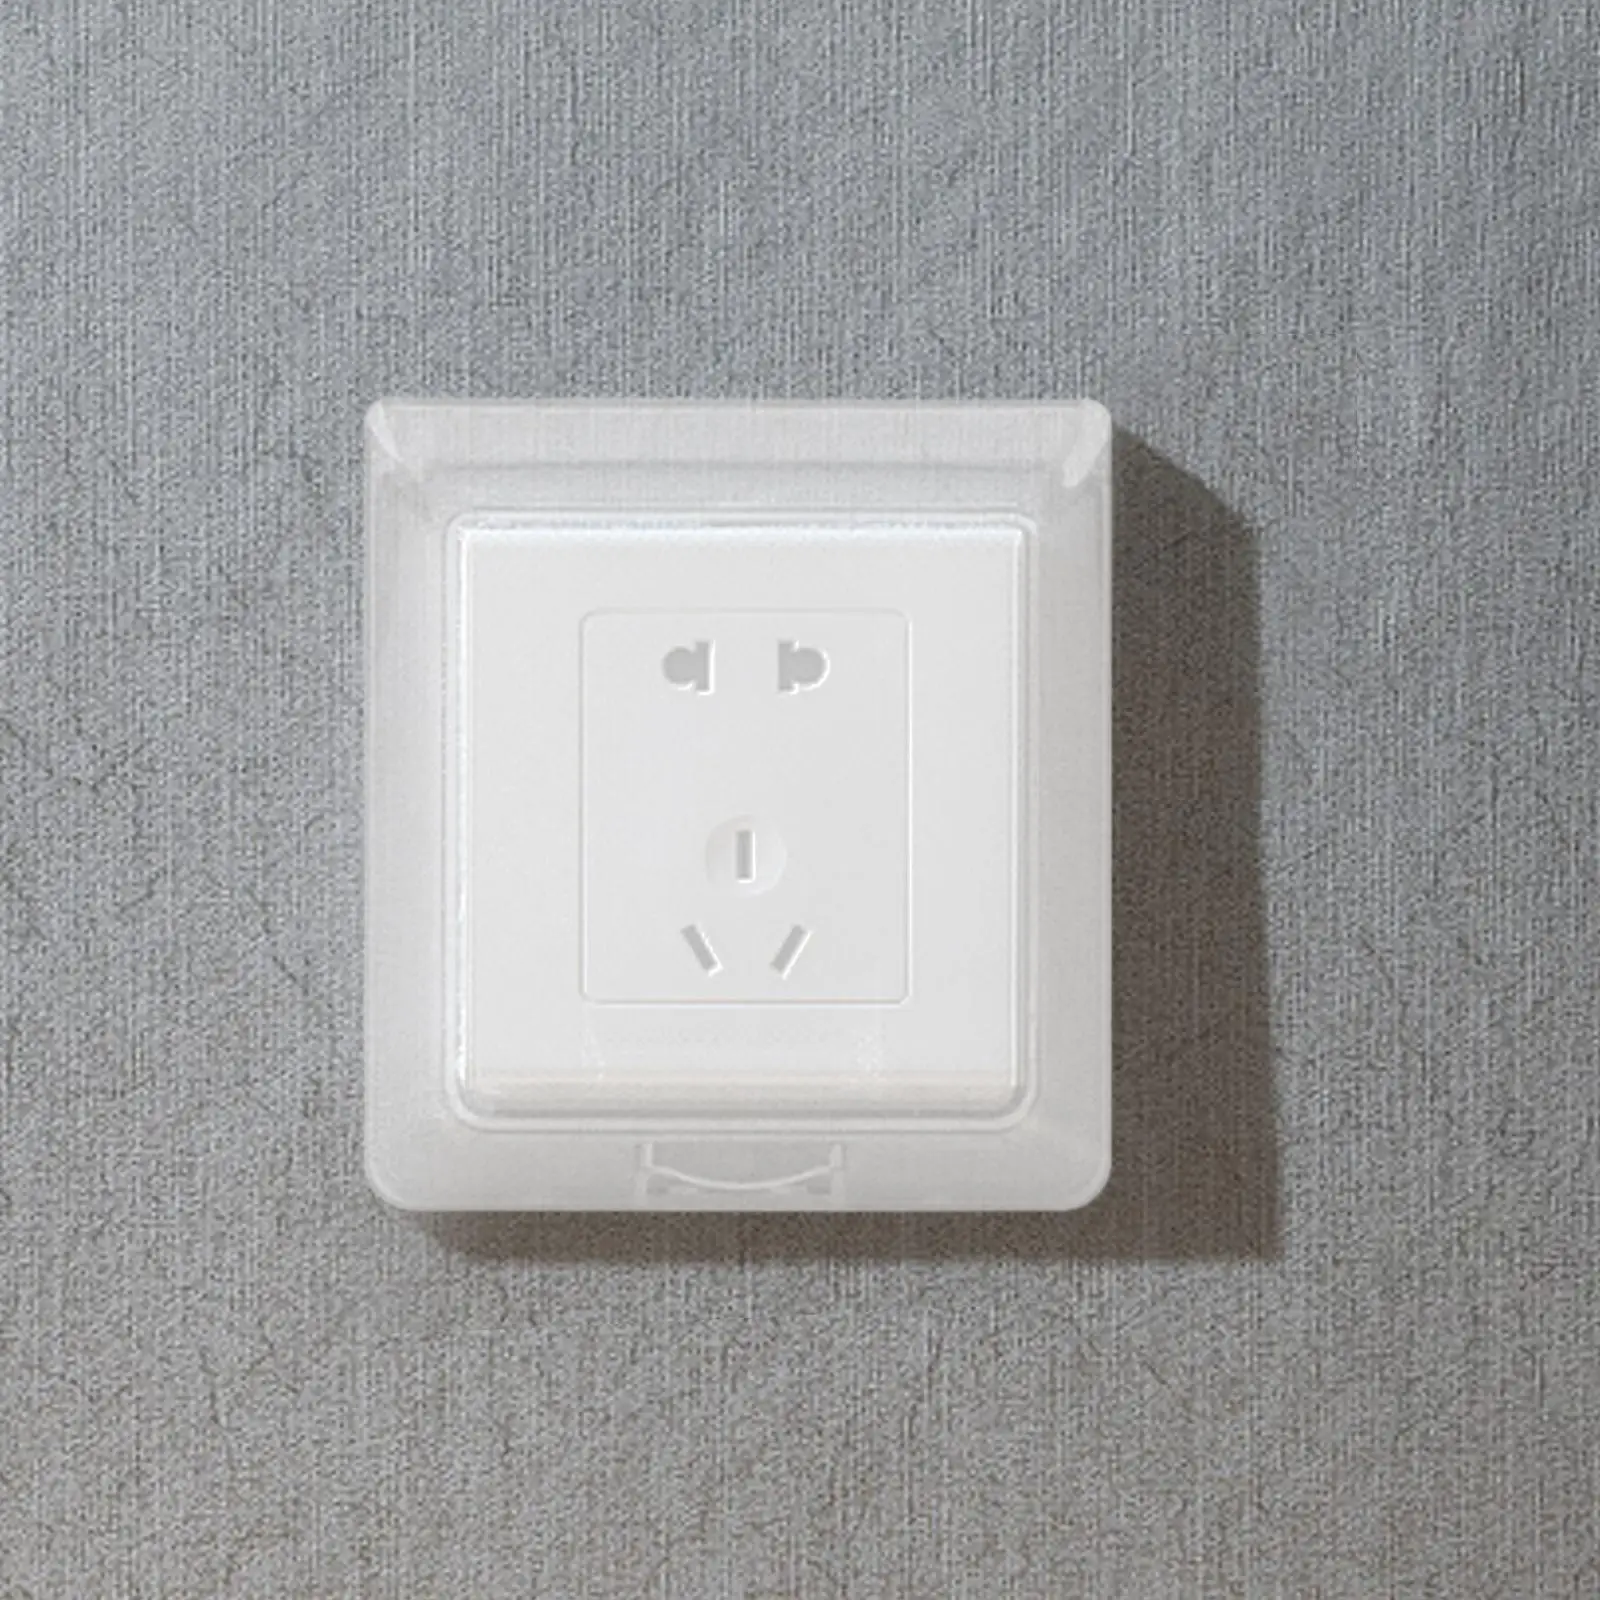 switch cover, lamp switch cover, waterproof, type 86, switch protection,